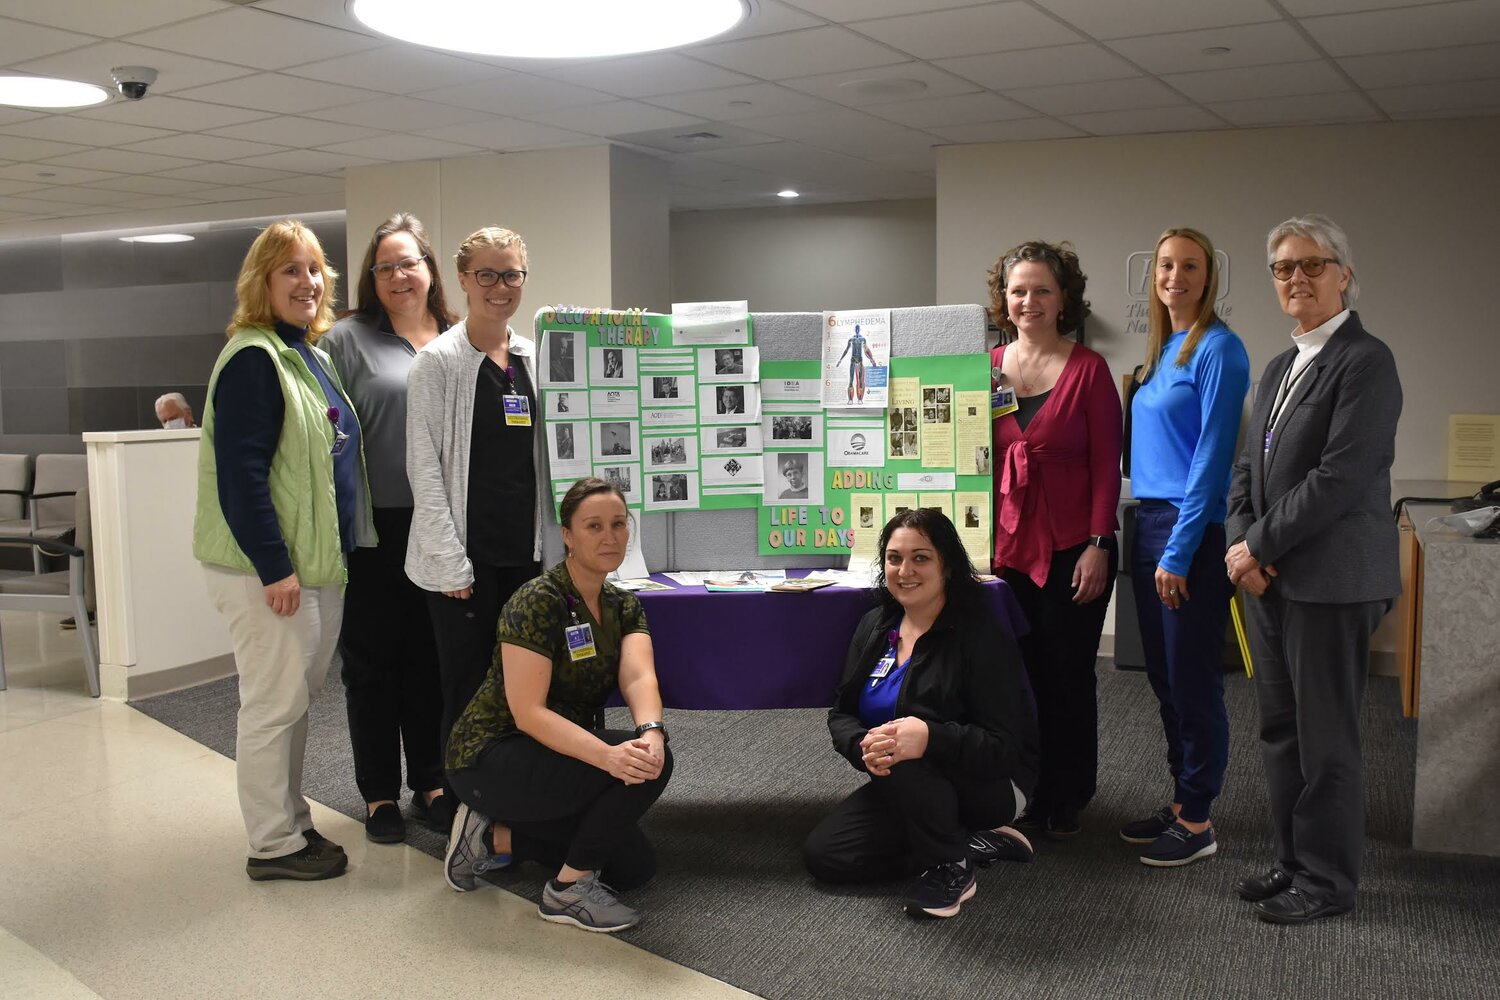 Creating hope and optimism with occupational therapy. Pictured, standing, are Kathleen Neenan, left; Linda Moore; Jacqueline Gallik; Kimberly Emick; Jessica O’Neill; and Terri Henderson. Pictured, kneeling are Kristen Ost, left, and Alyssa Tyler. Missing from photo are Sean Phillips, Karen Stumpo and Kristen Krayer...